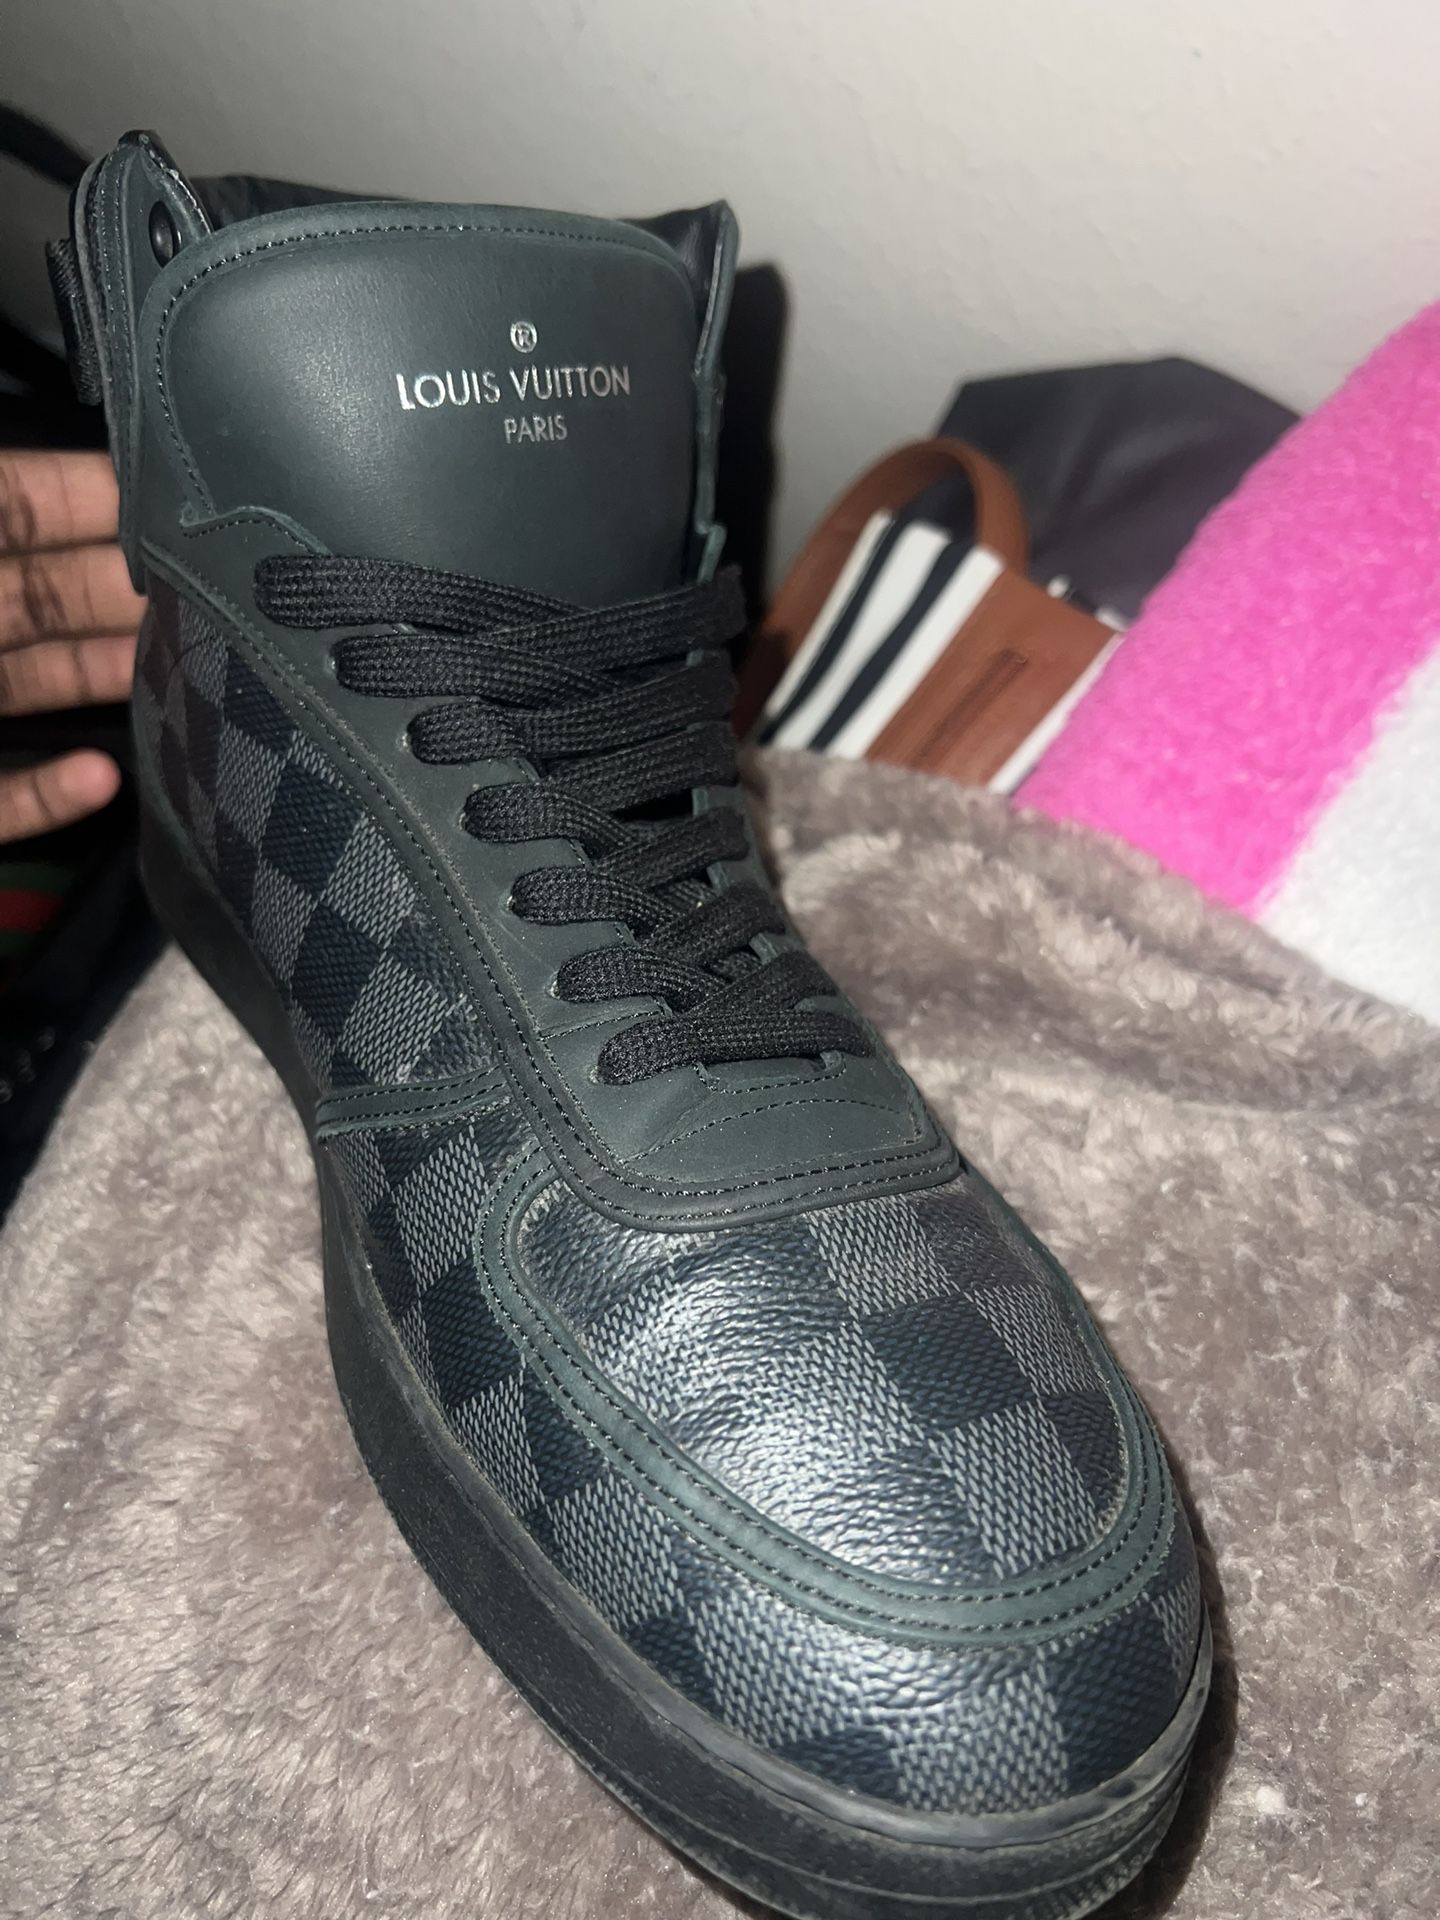 Louis Vuitton Monogram Sneakers for Sale in Cleveland, OH - OfferUp